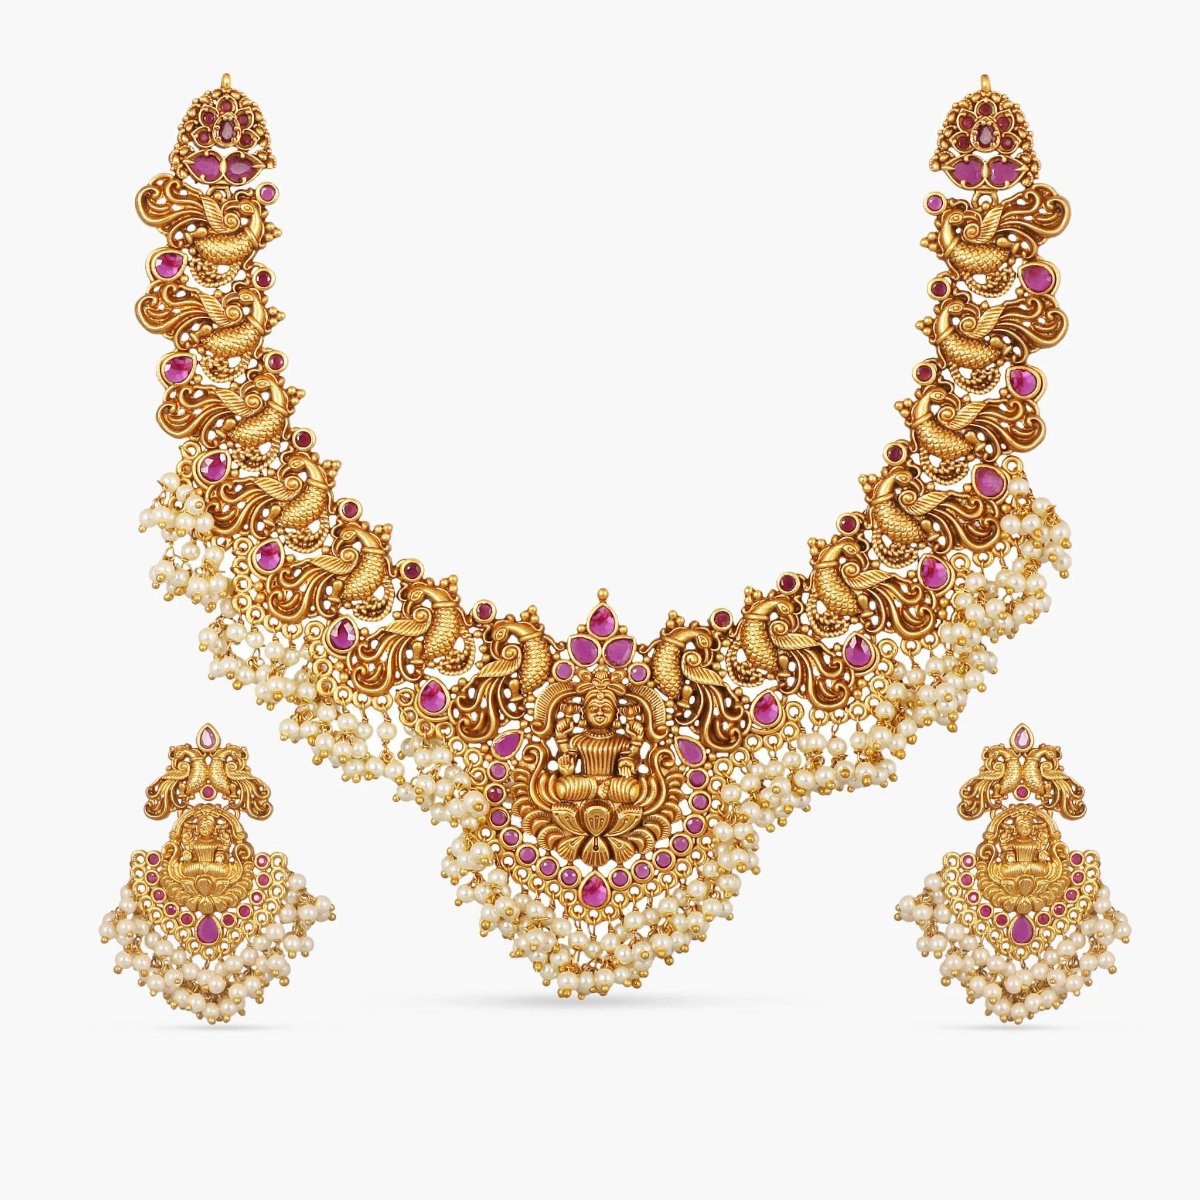 A picture of an Indian artificial gold necklace and earring set. The necklace is embellished with pearls and the earrings are chandelier style.